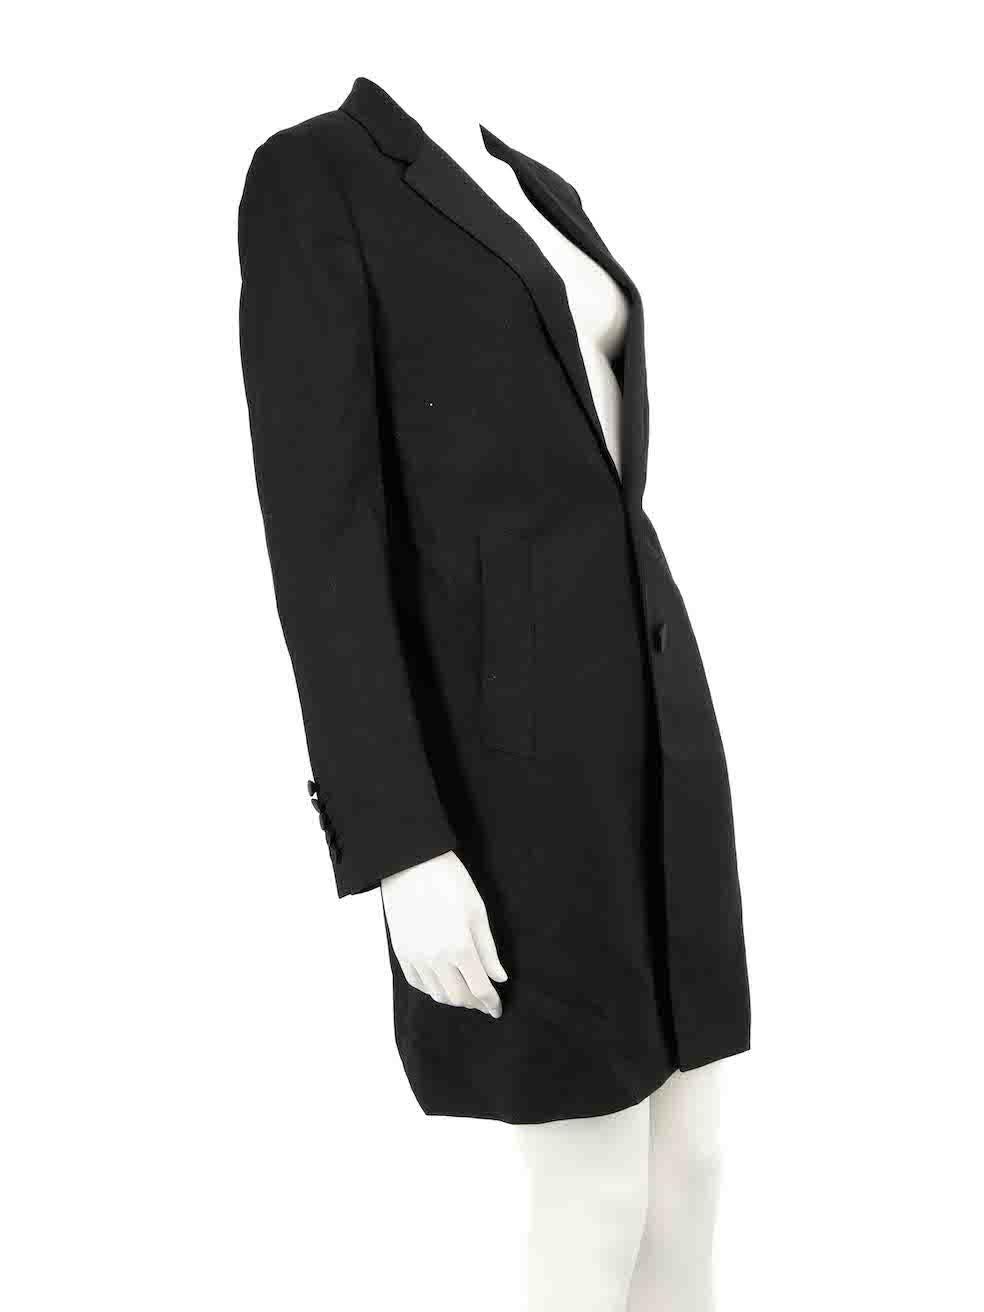 CONDITION is Very good. Minimal wear to coat is evident. Minimal wear to the left lapel with a pluck to the weave on this used Saint Laurent designer resale item.
 
 
 
 Details
 
 
 Black
 
 Wool
 
 Blazer coat
 
 Button up fastening
 
 Shoulder